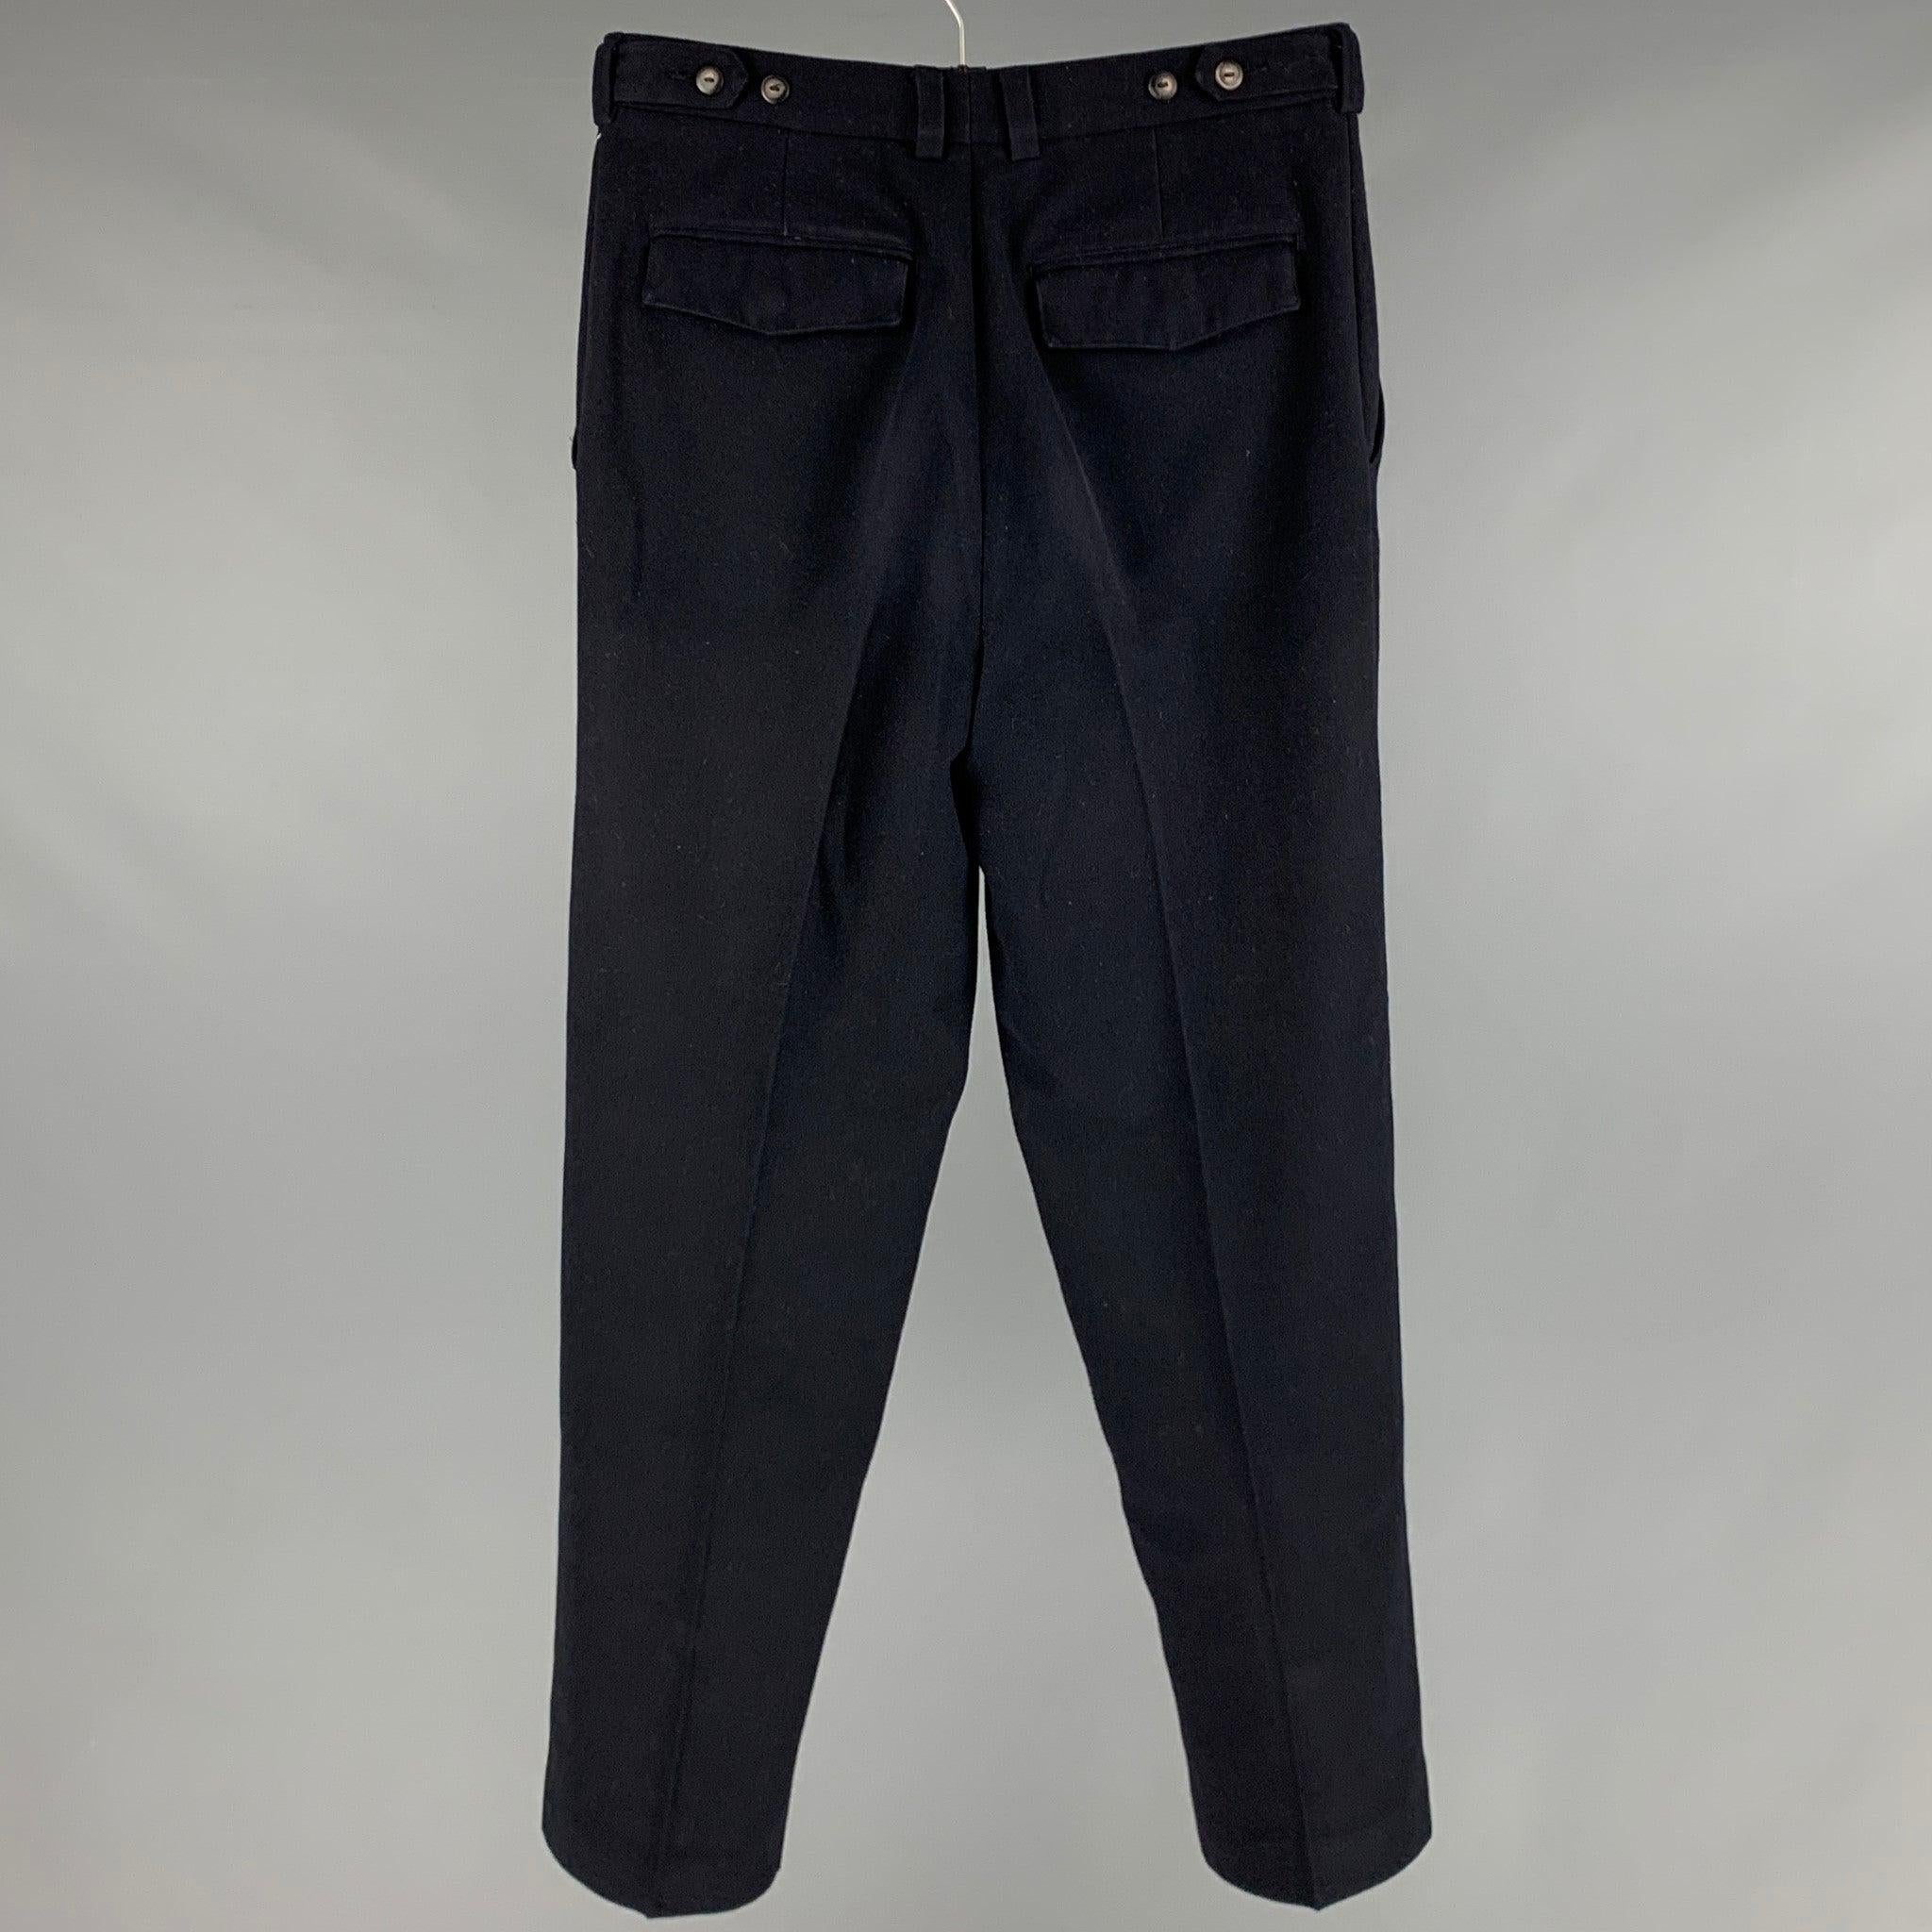 BALMAIN dress pants
in a black polyester blend fabric featuring a high waisted look, flat front style, and zip fly closure. Excellent Pre-Owned Condition. 

Marked:  32 

Measurements: 
 Waist: 32 inches Rise: 10.5 inches Inseam: 30 inches Leg